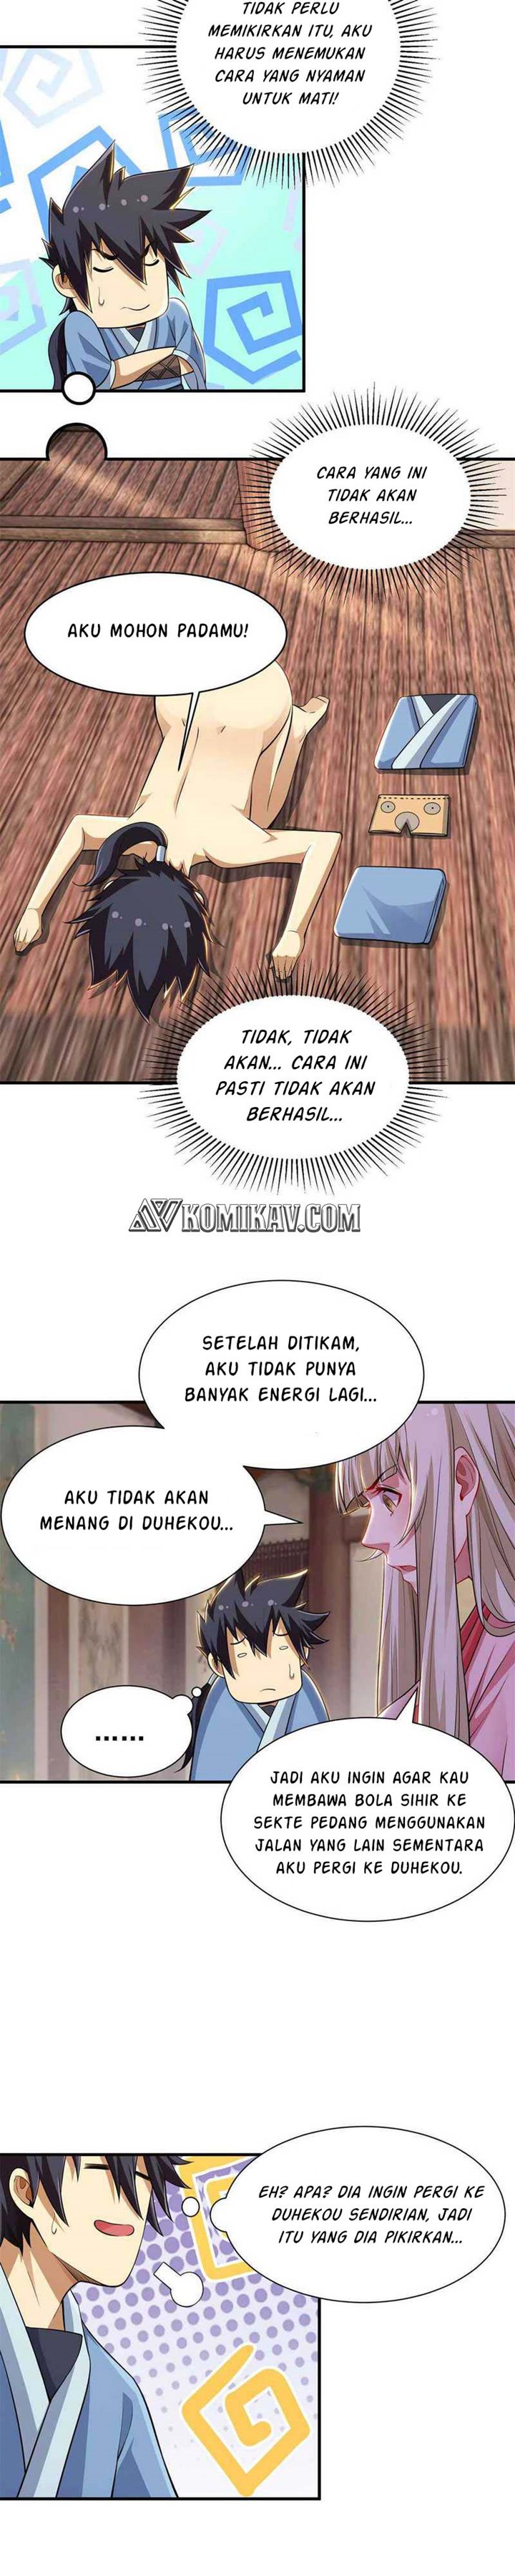 Dilarang COPAS - situs resmi www.mangacanblog.com - Komik i just want to be beaten to death by everyone 021 - chapter 21 22 Indonesia i just want to be beaten to death by everyone 021 - chapter 21 Terbaru 6|Baca Manga Komik Indonesia|Mangacan